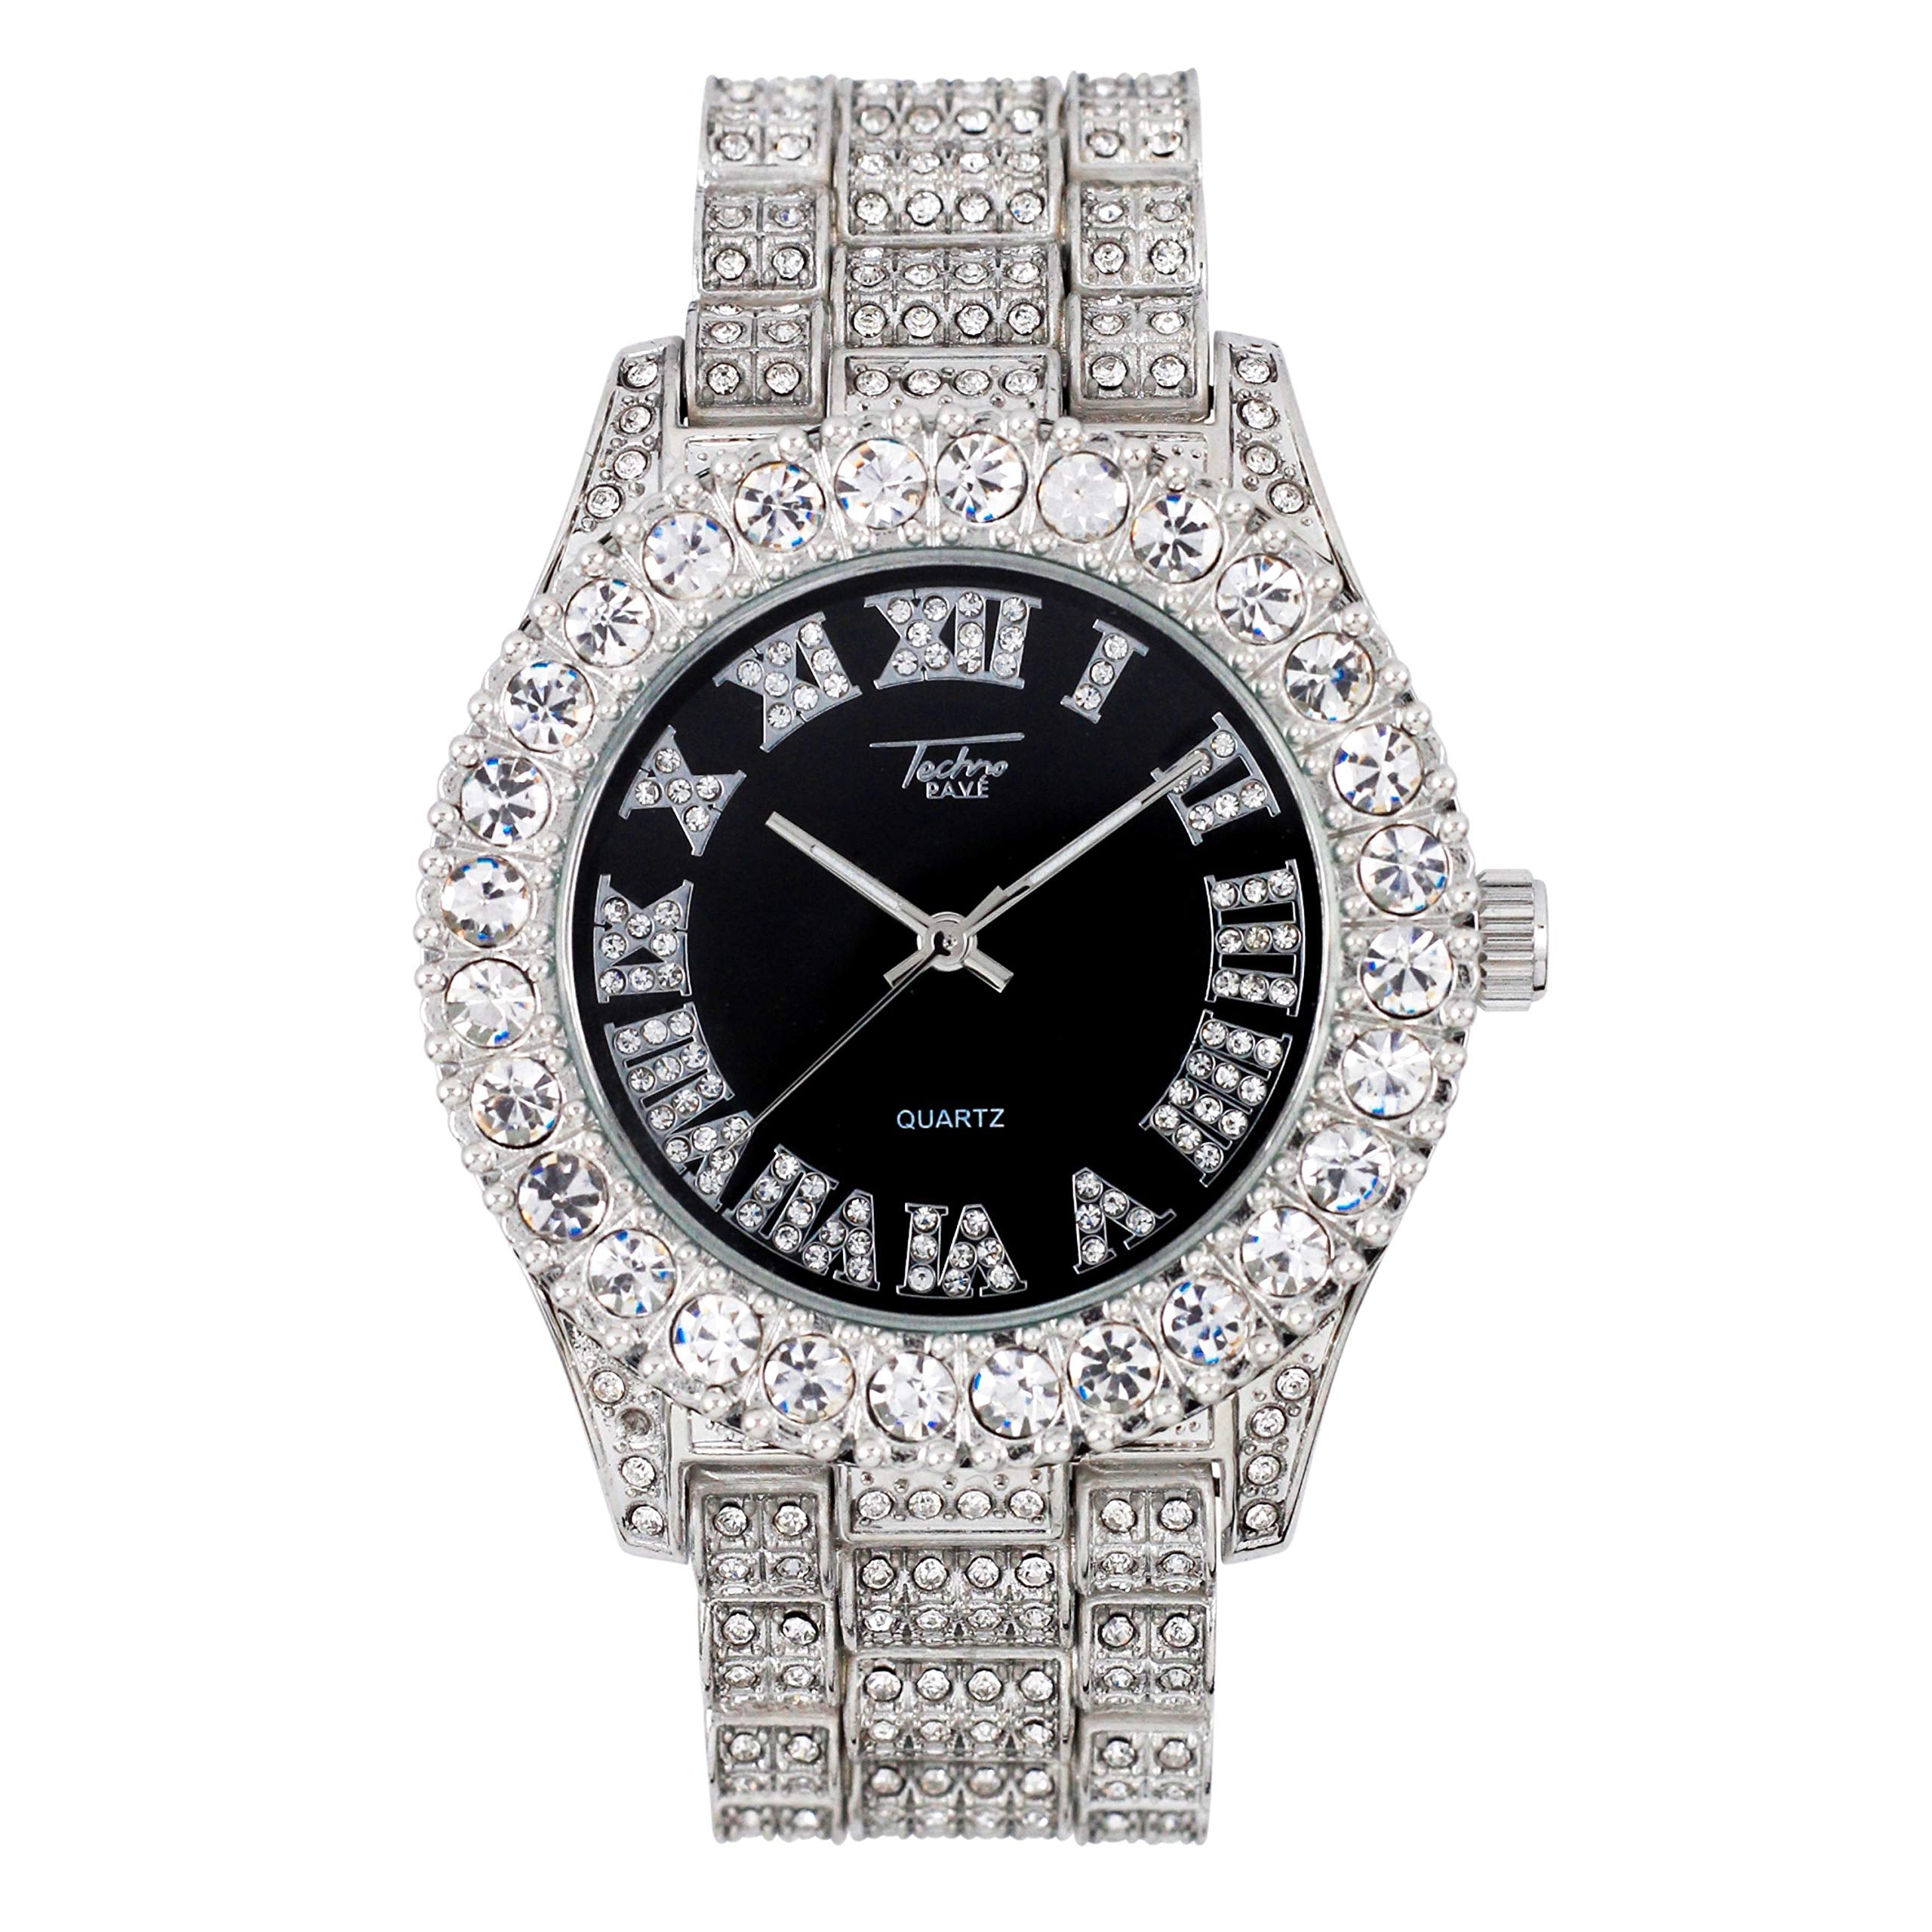 Men's Round Iced Out Watch 44mm Silver - Roman Dial